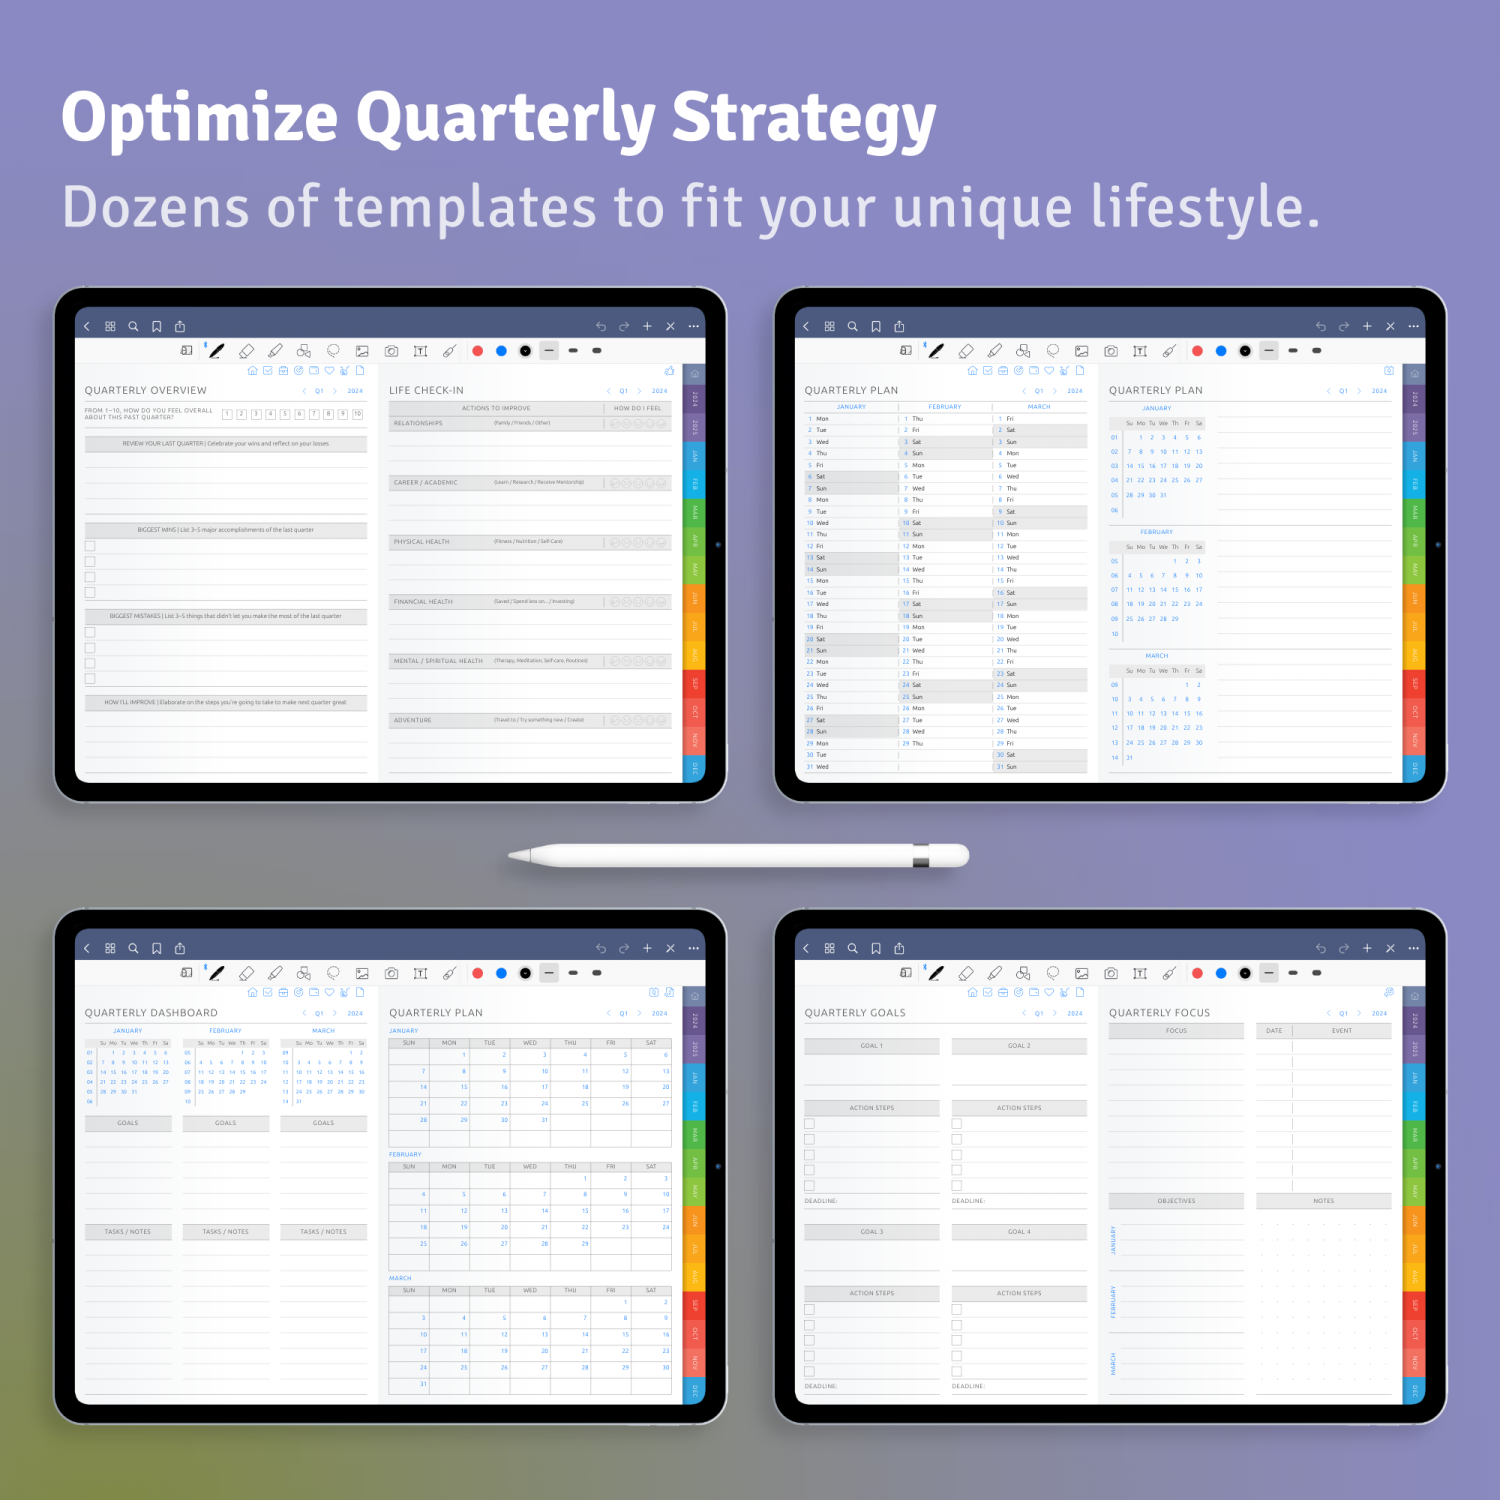 Quarterly success and planning templates